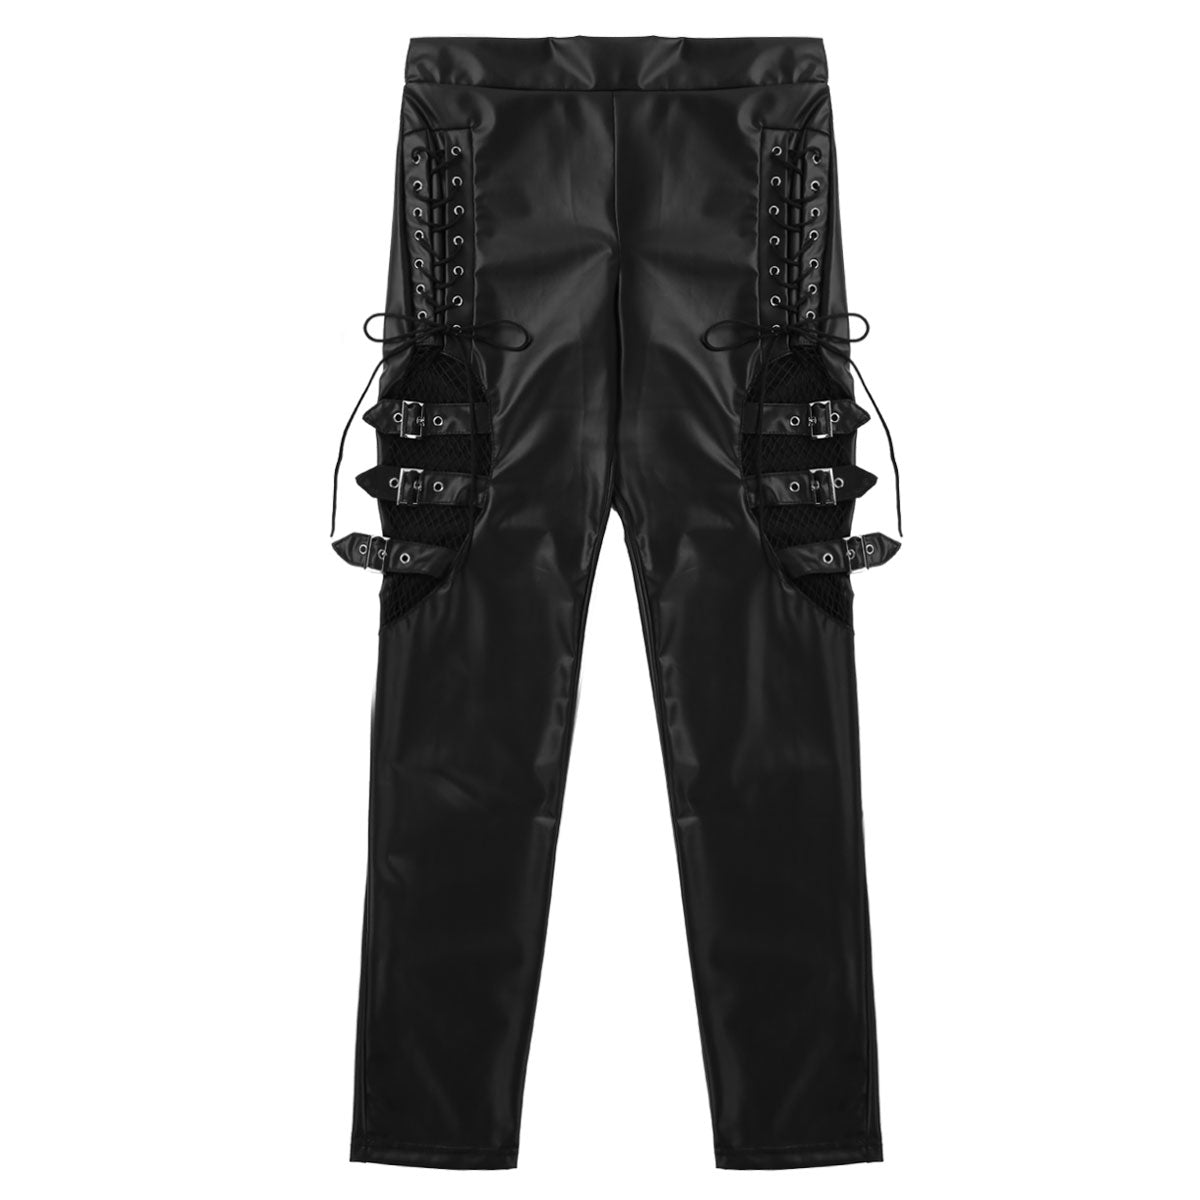 wet look faux leather fishnet stretchy legging trousers